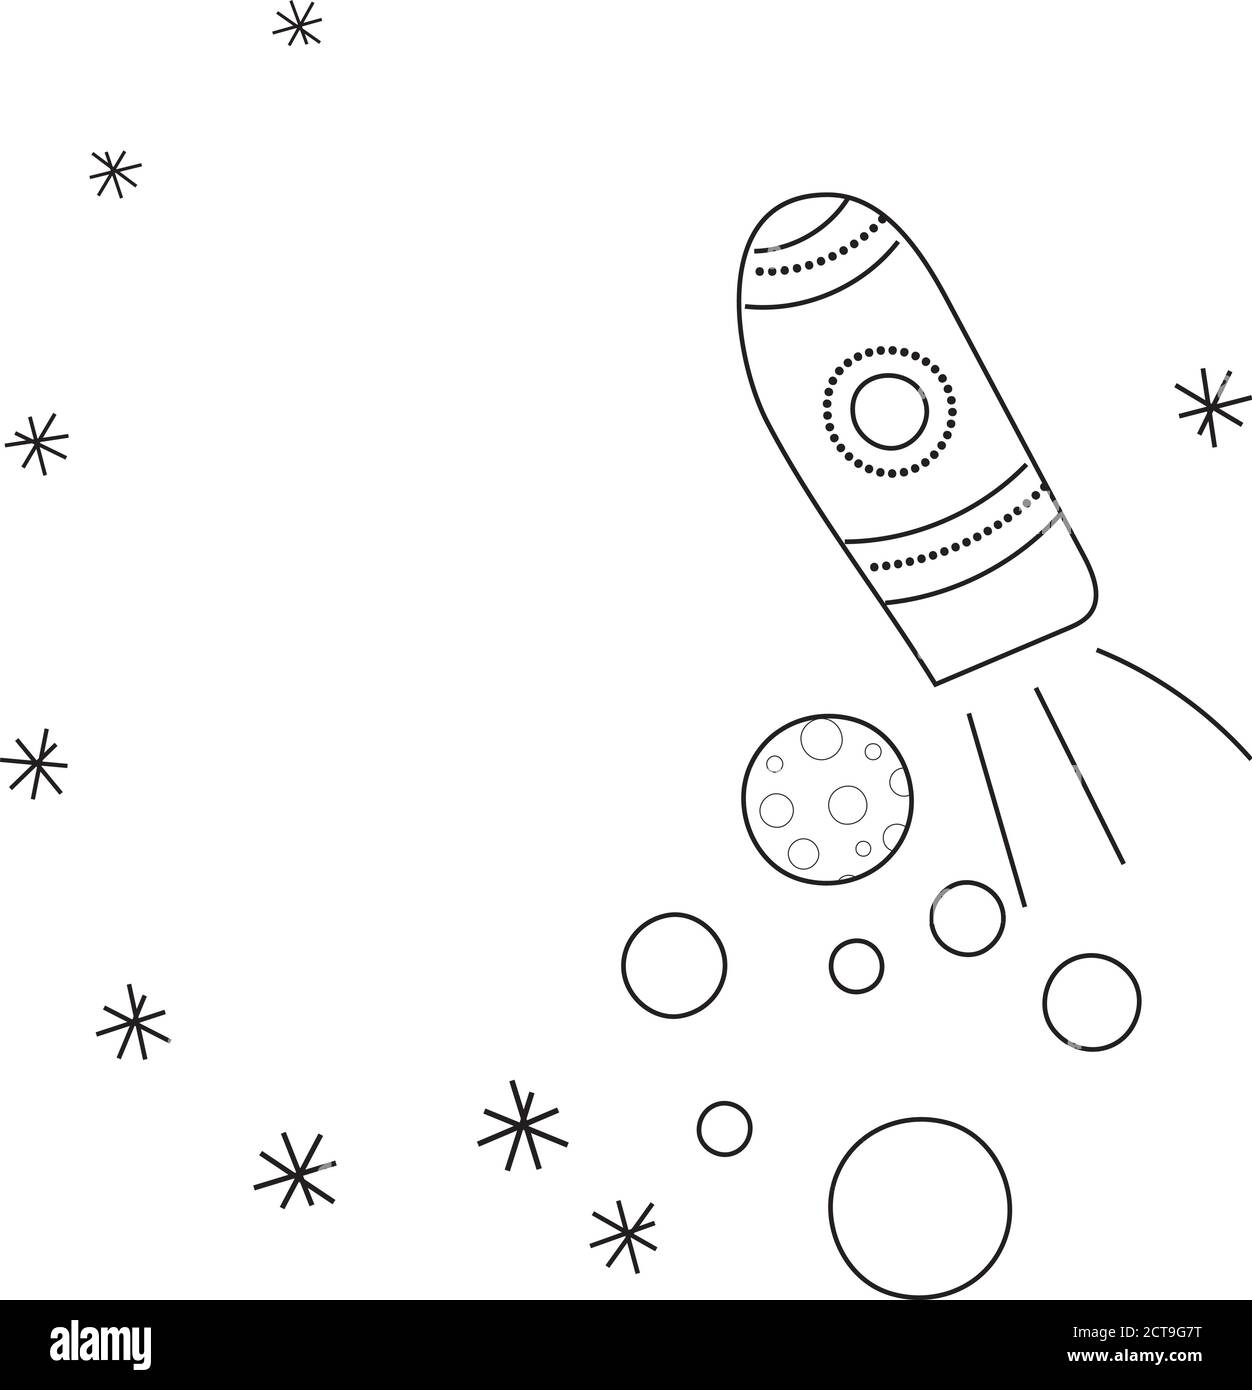 rocket, planets, and stars vector illustration Stock Vector